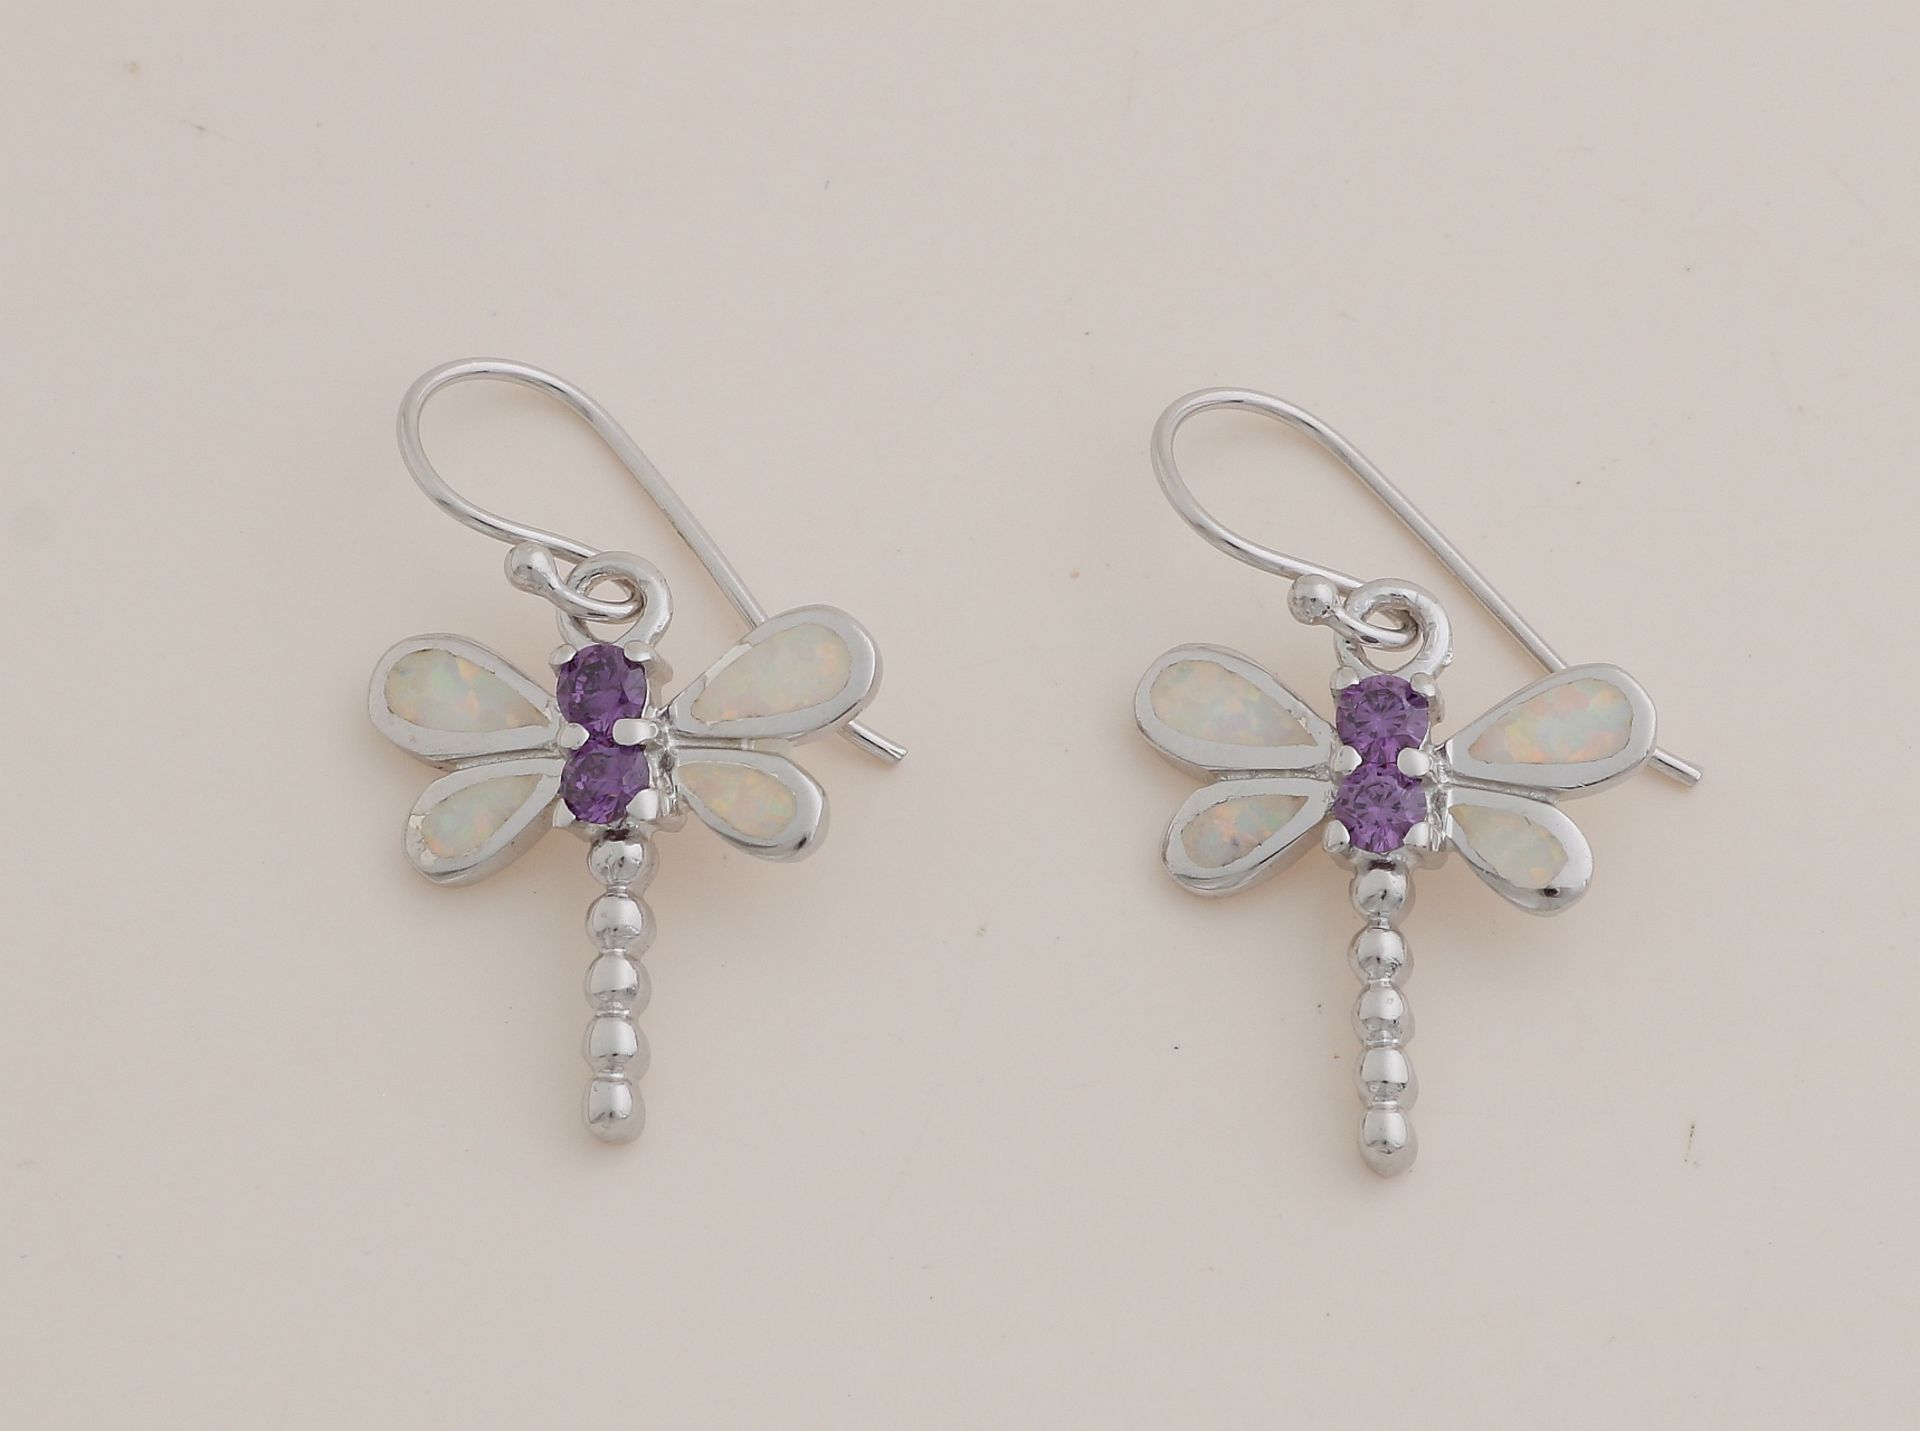 Silver earrings with dragonfly